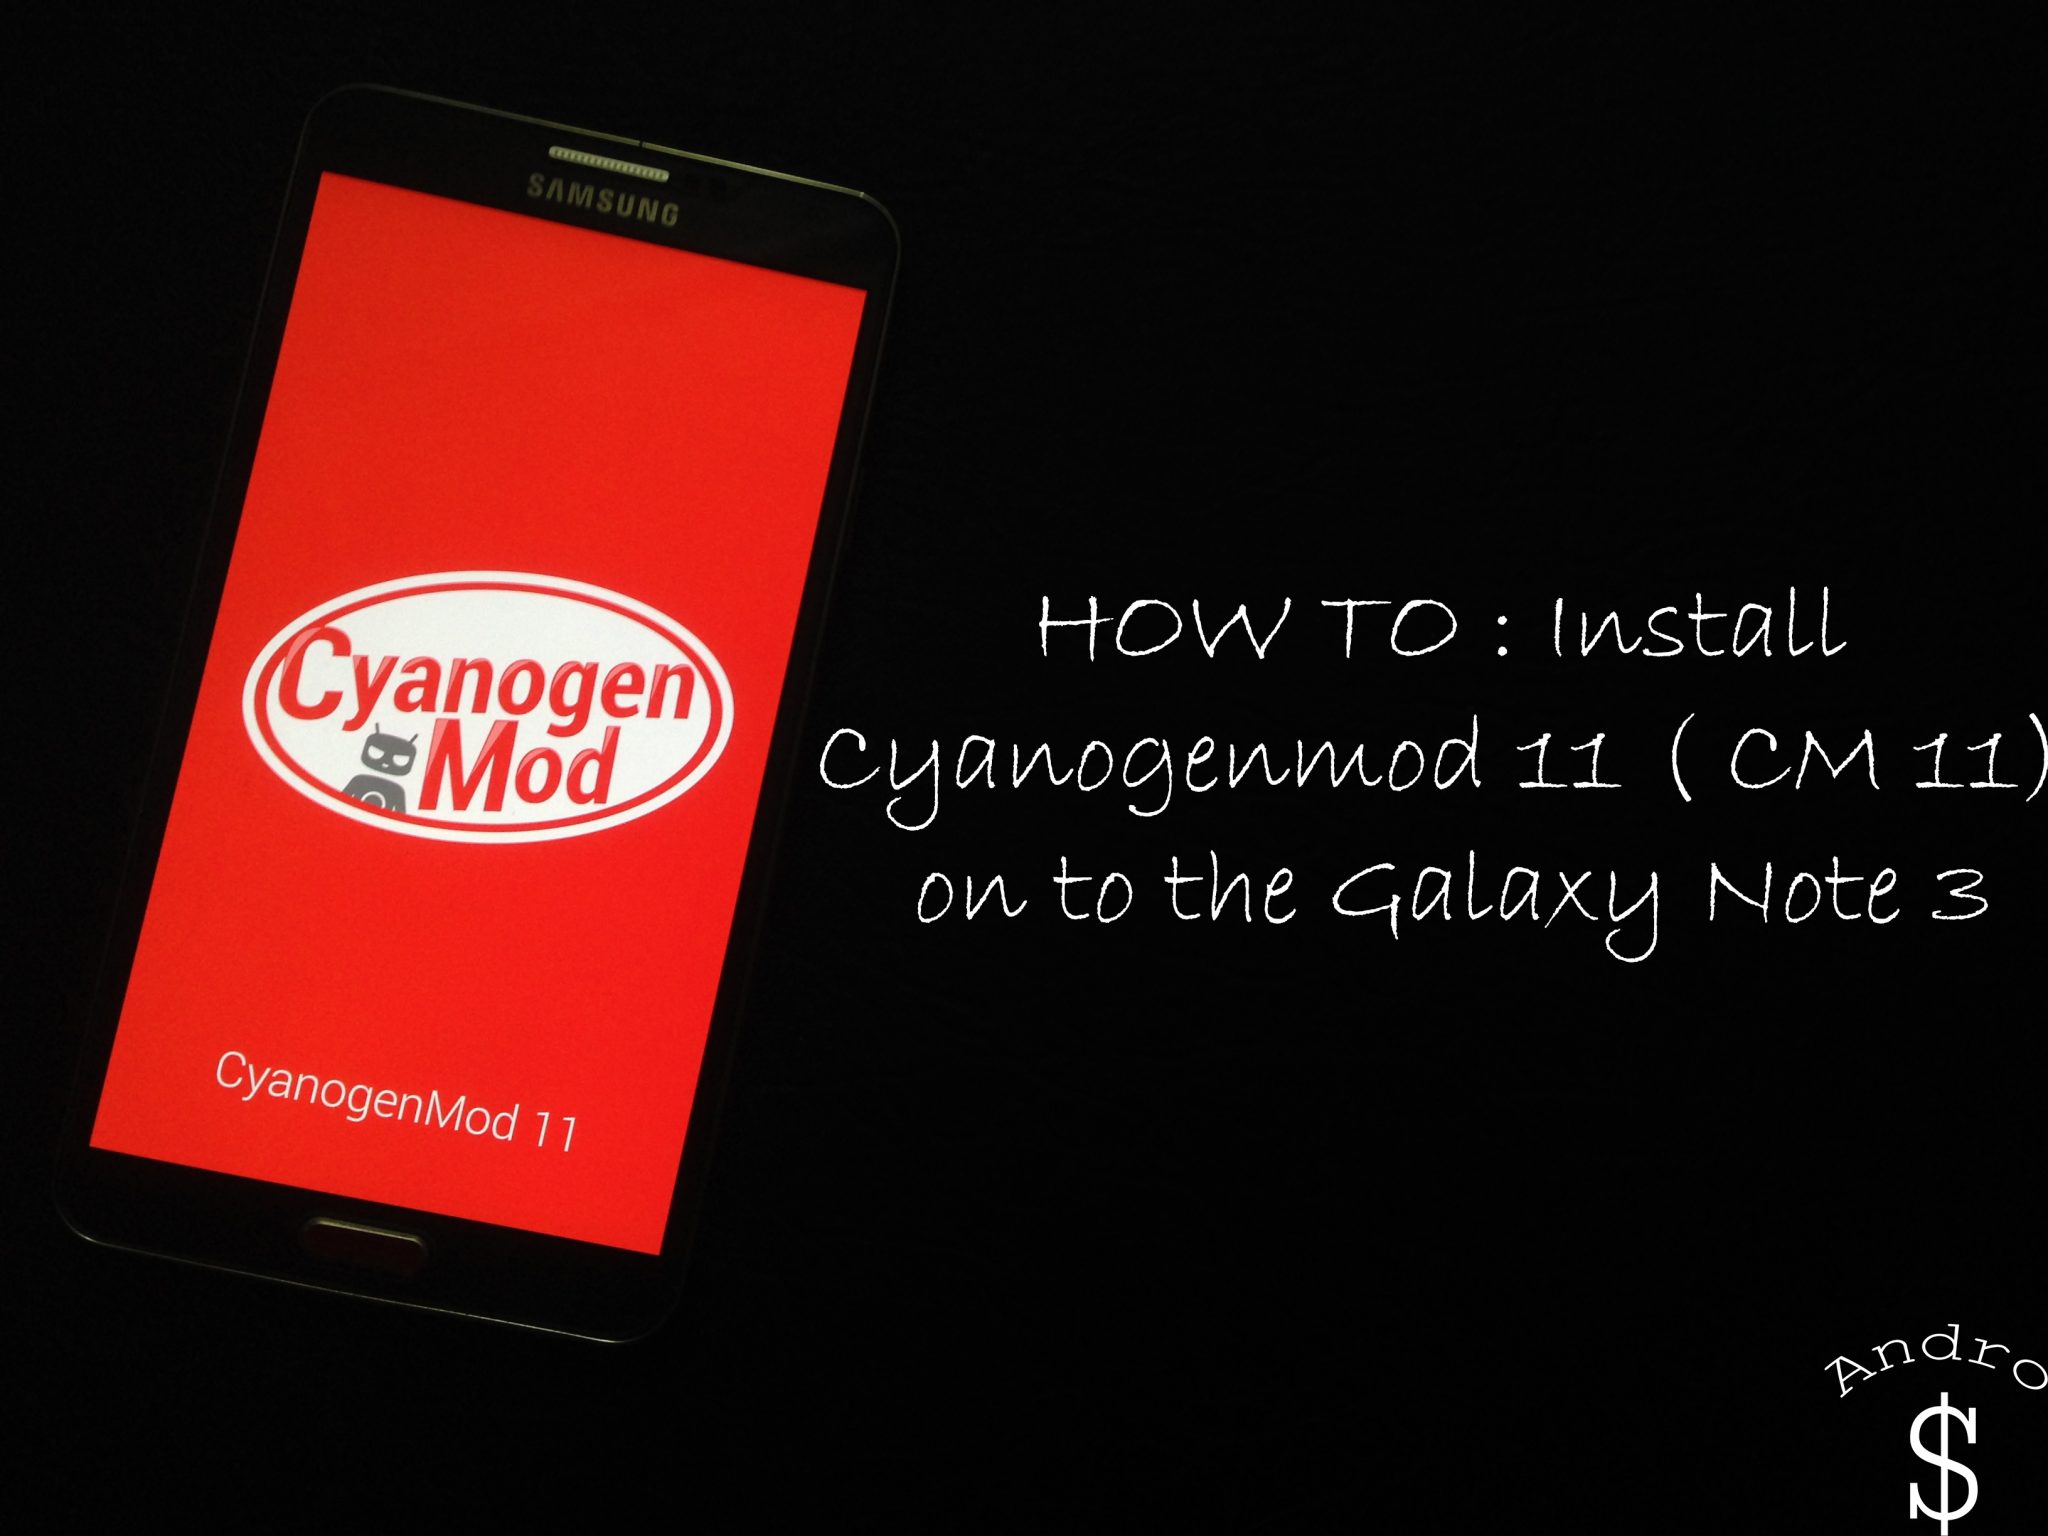 Install Cyanogenmod 11 on to the Galaxy Note 3